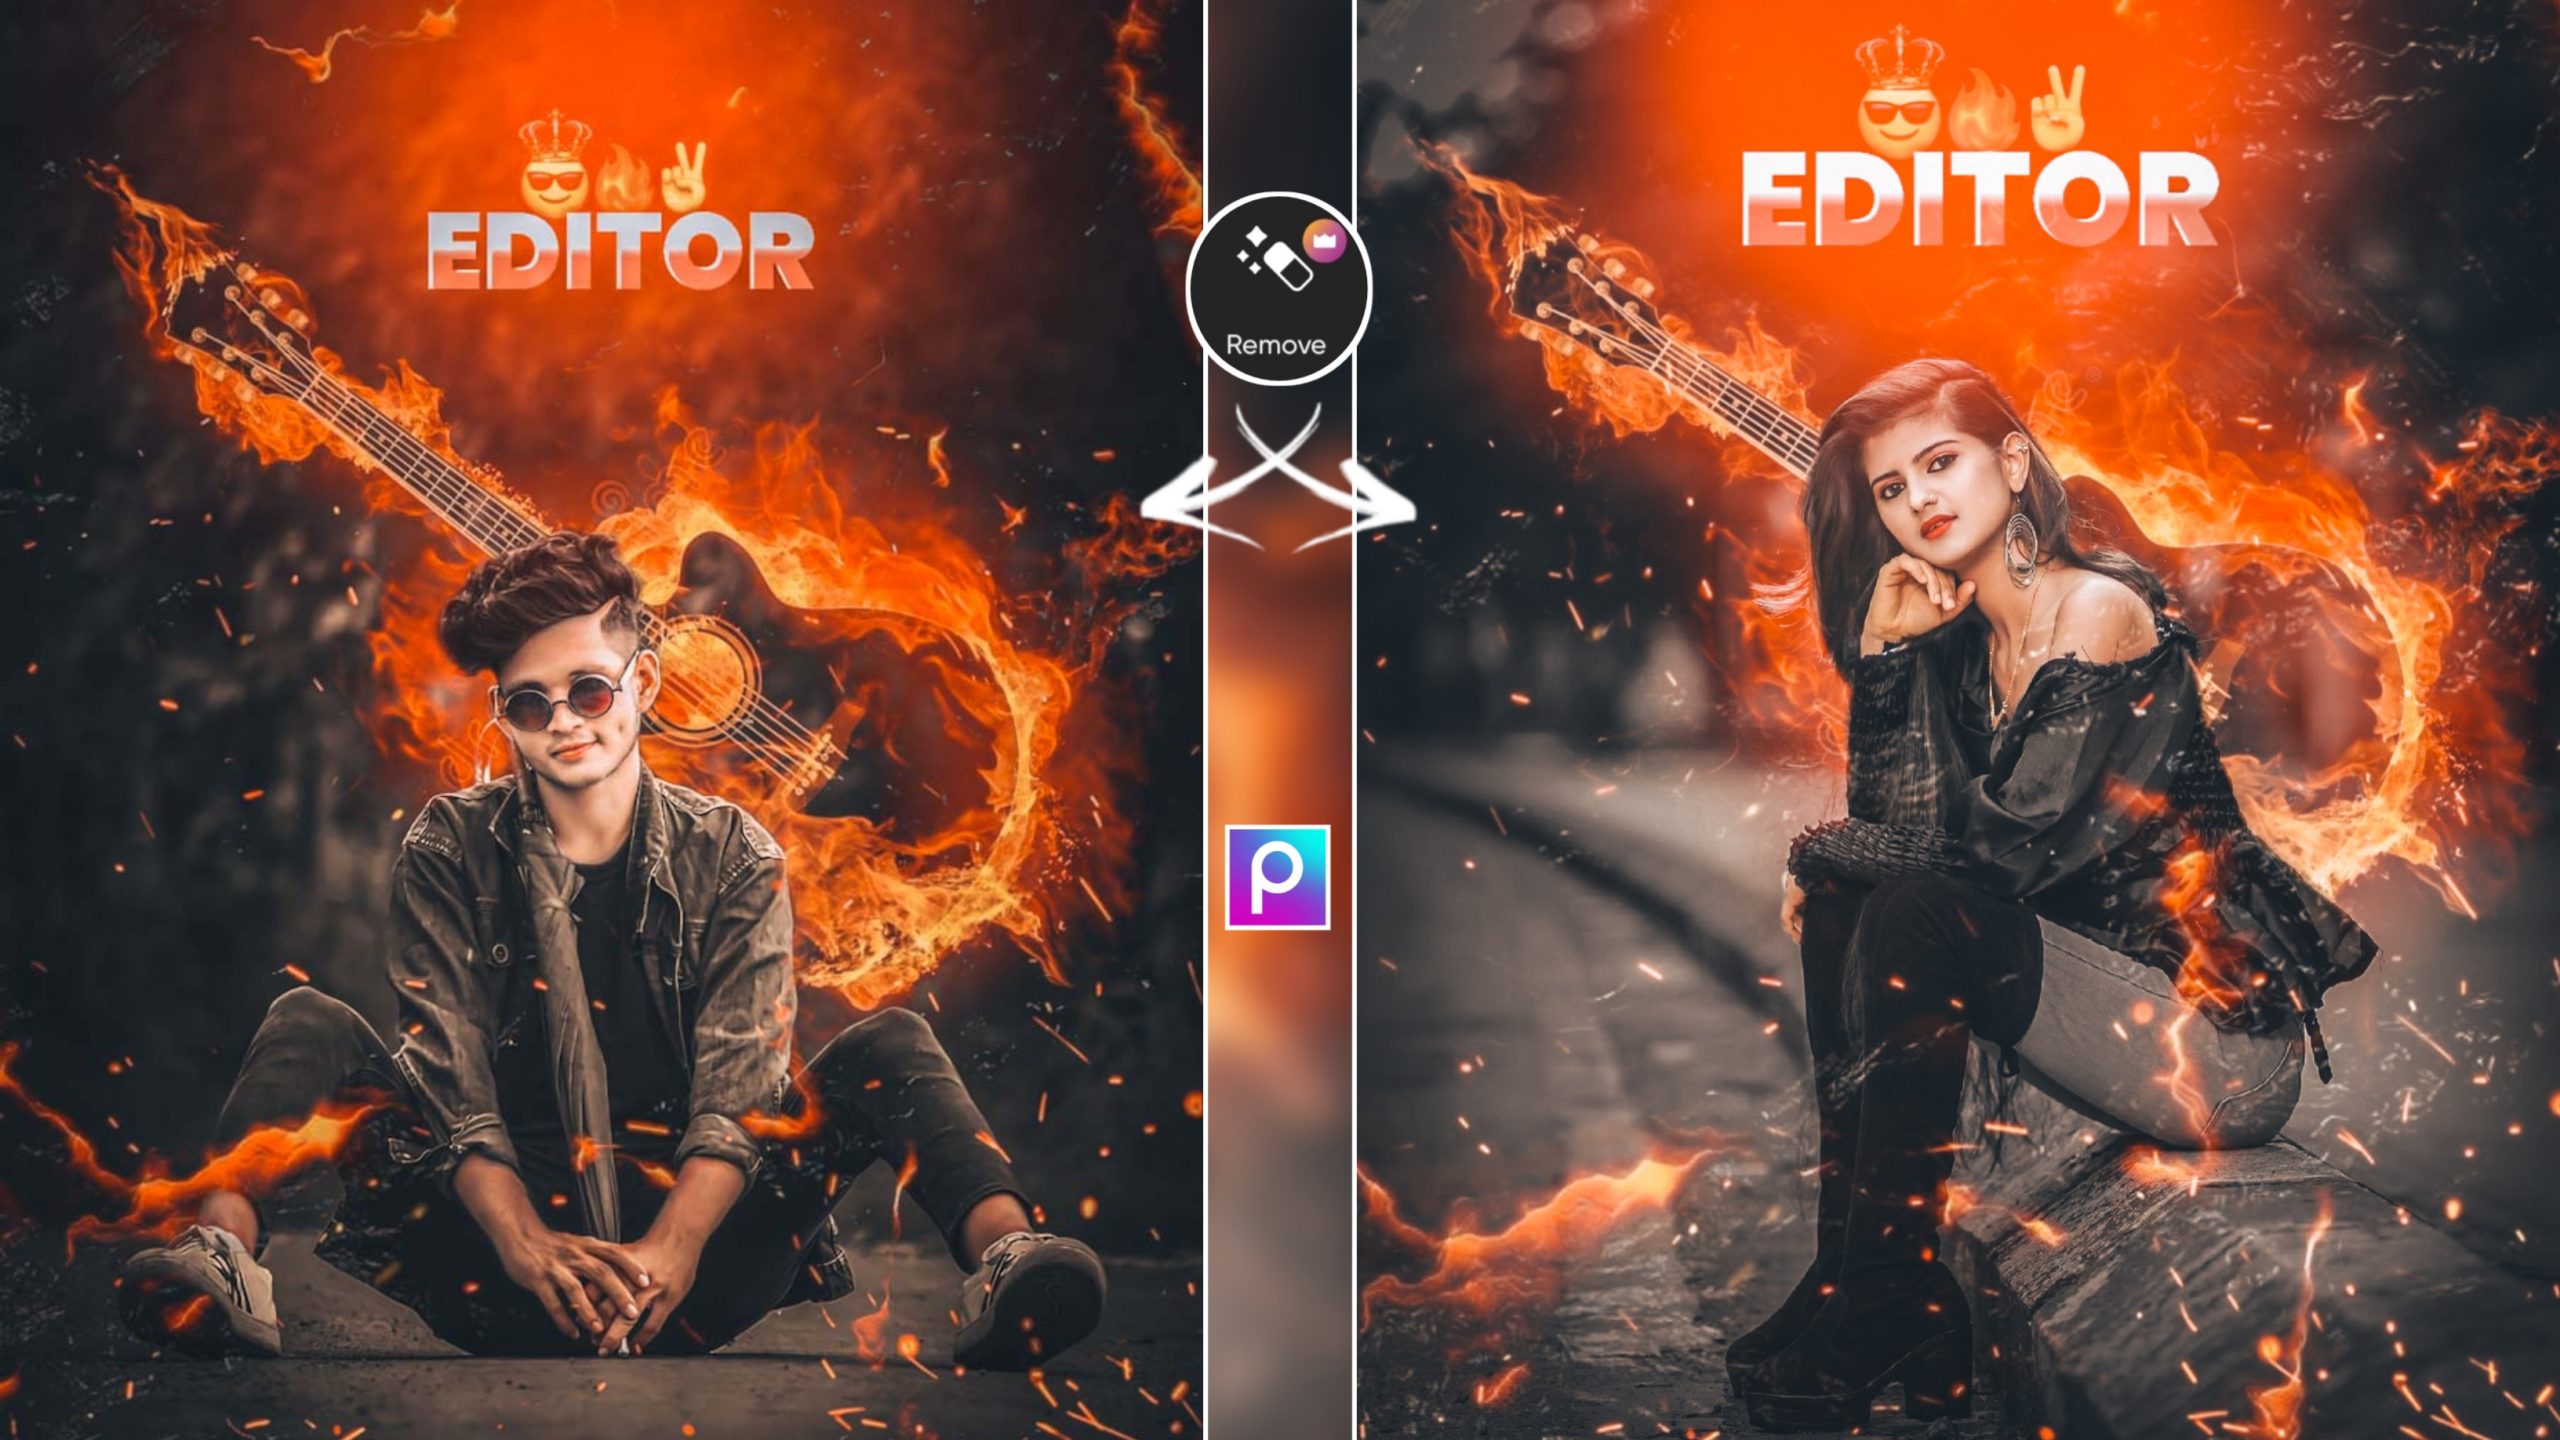 The Editor's Secrets  Light background images, Picsart png, Png images for  editing